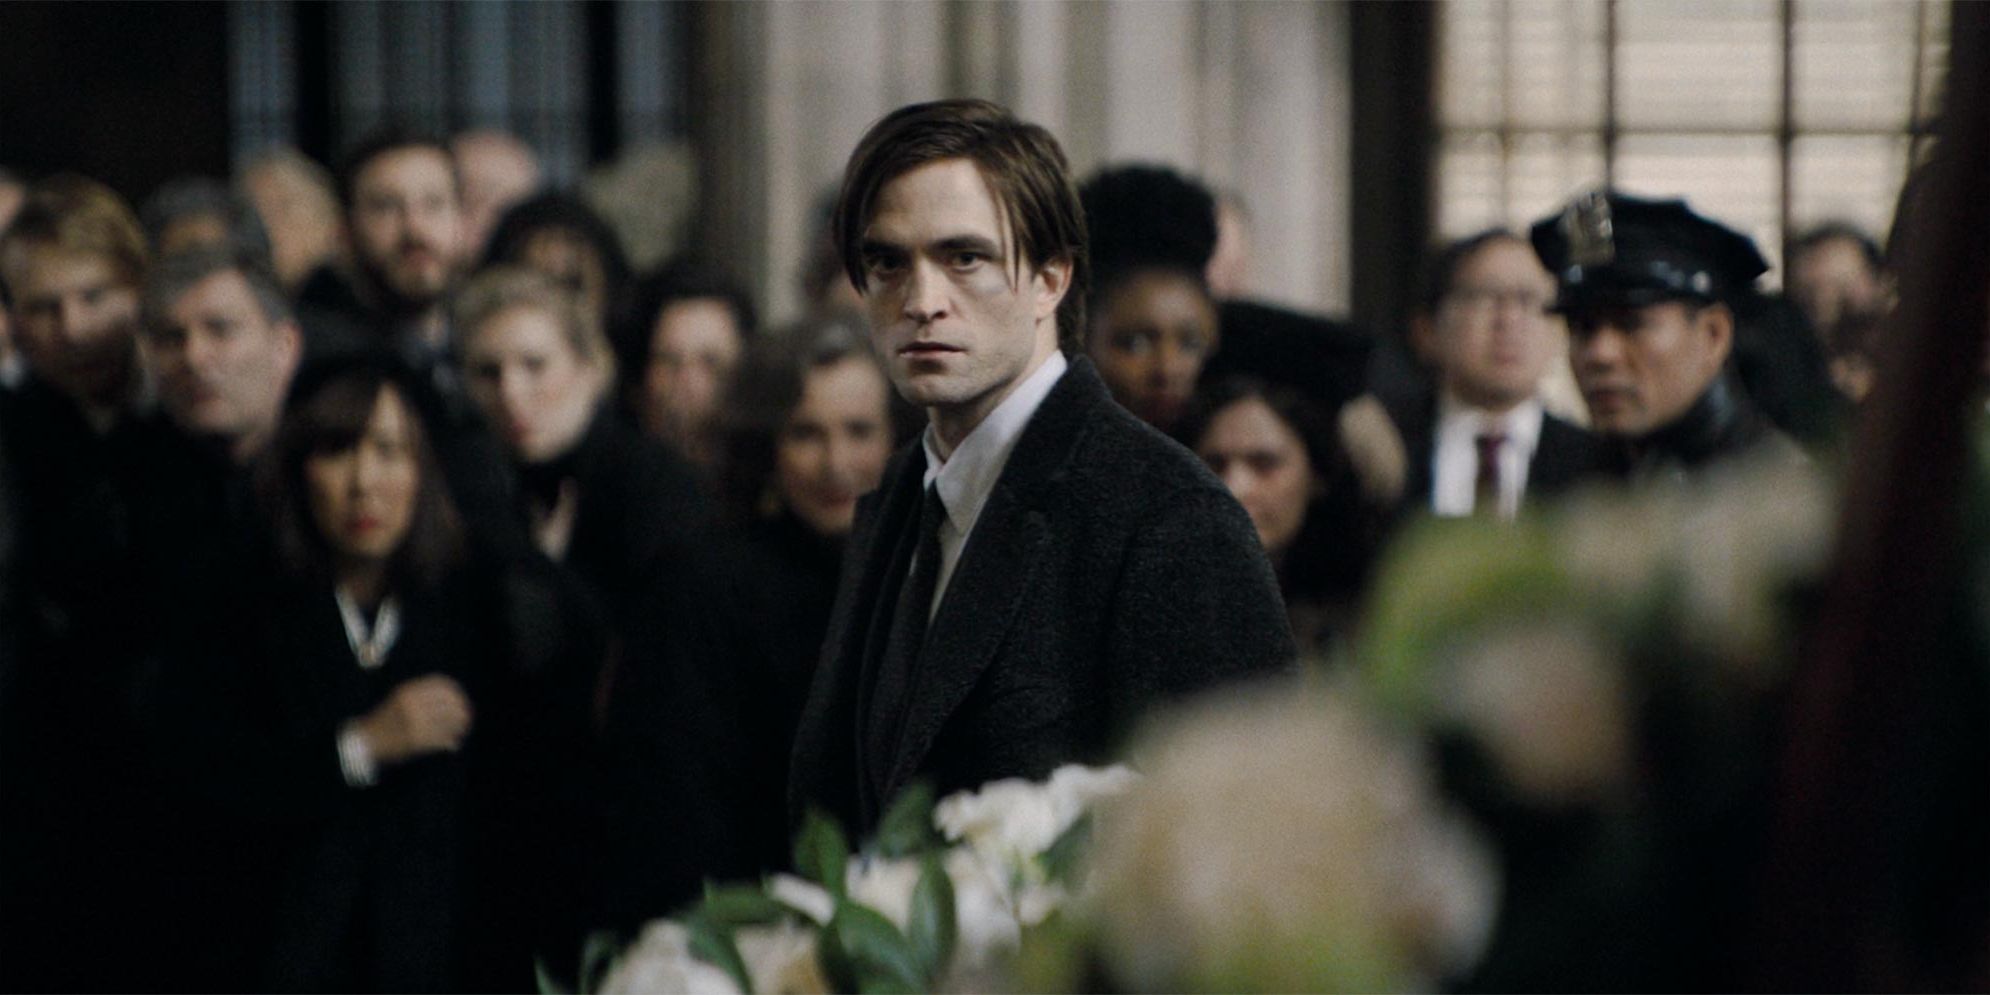 Bruce Wayne at a funeral looking intently to the distance in The Batman.